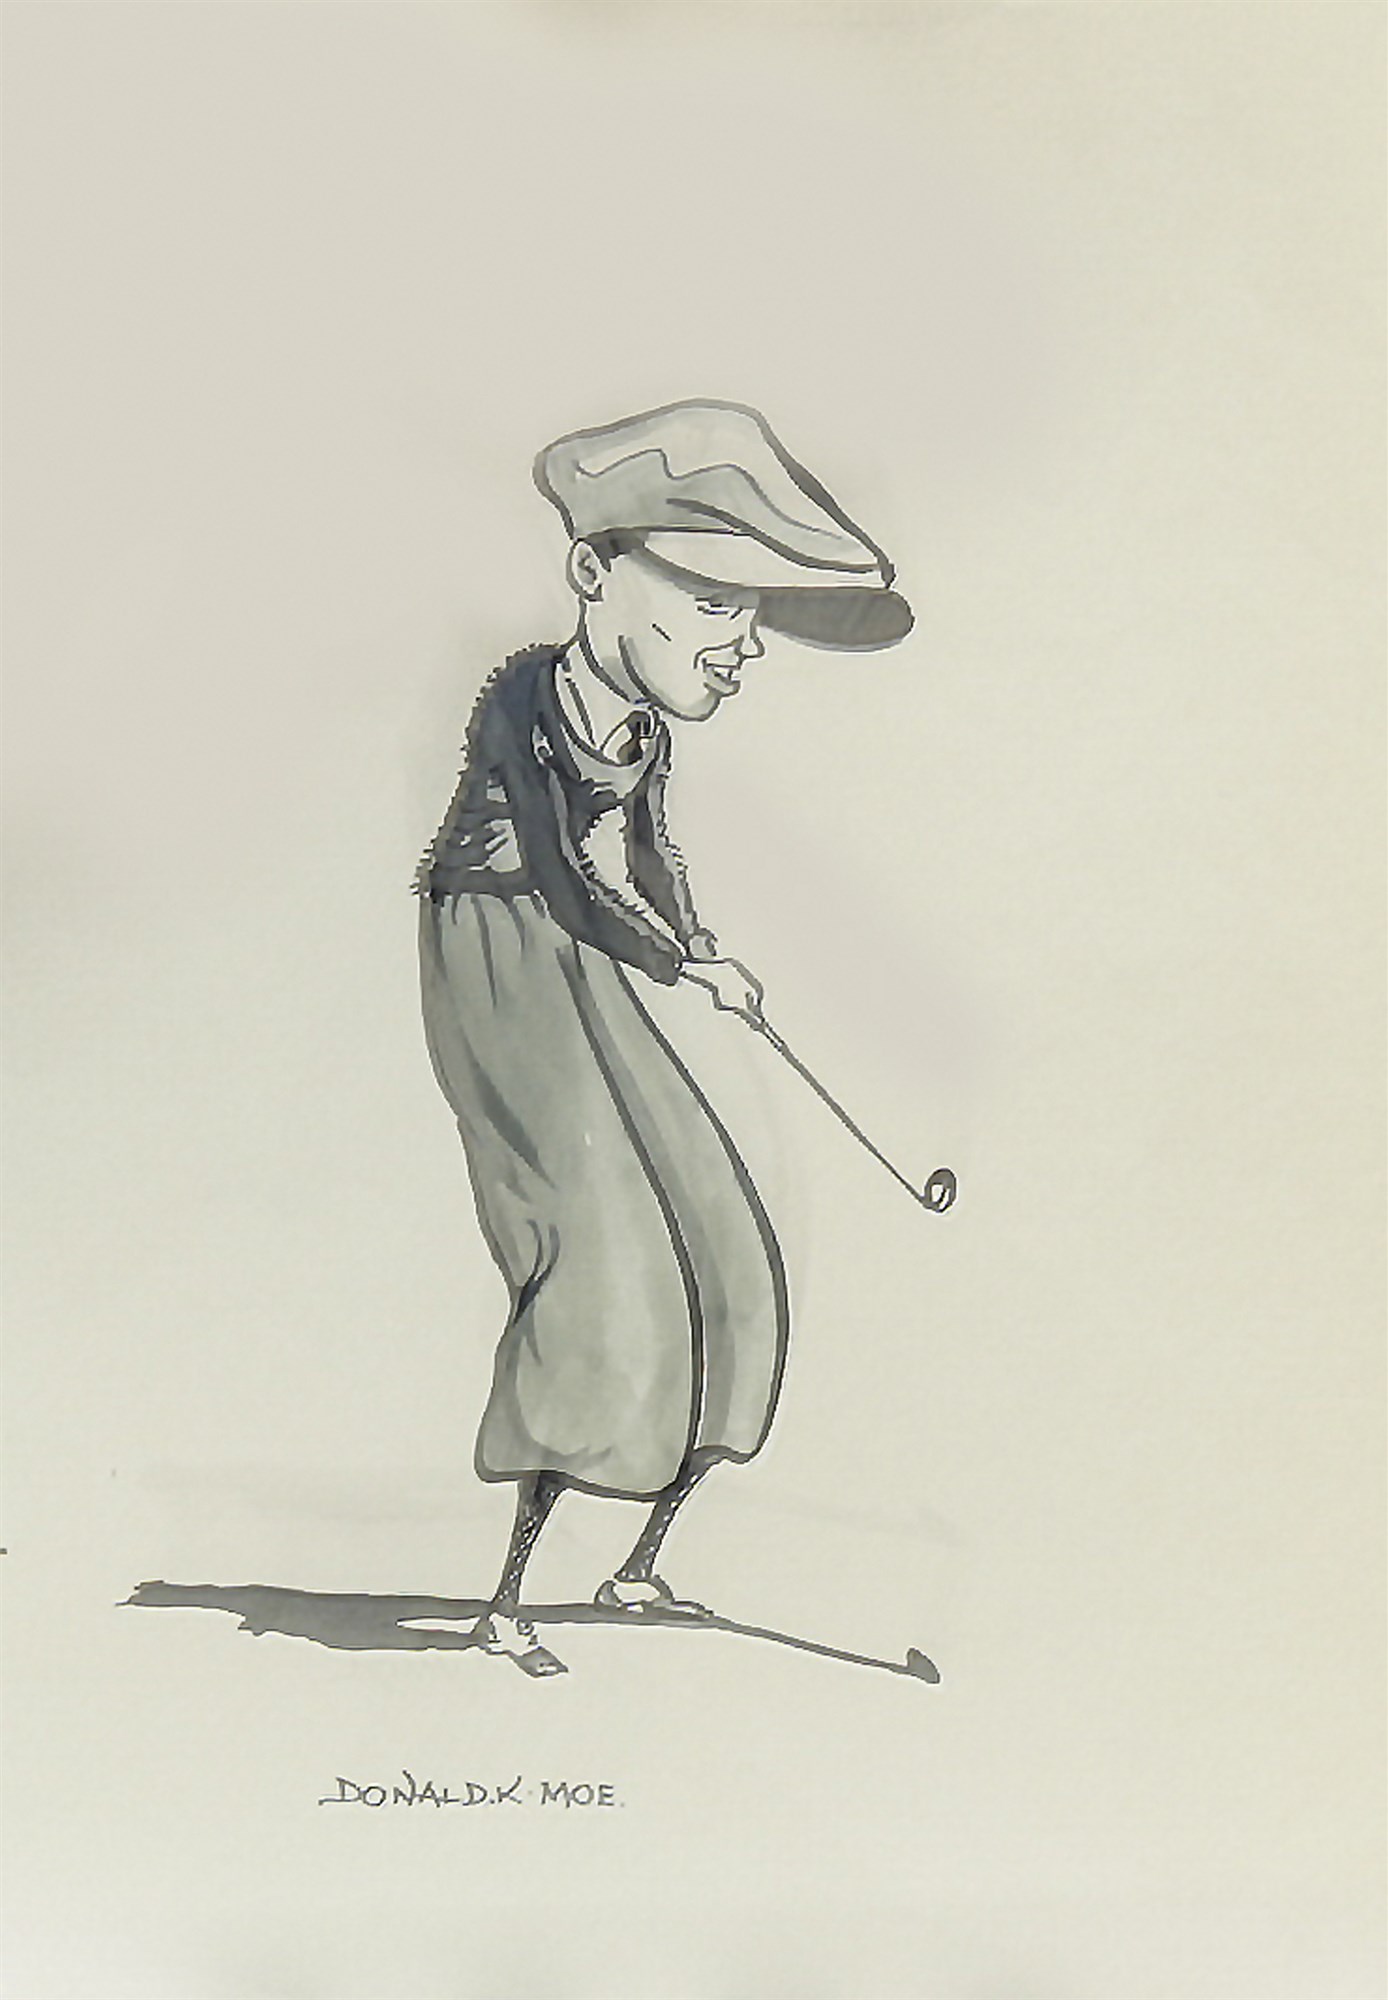 A SERIES OF GOLF CARICATURES (13), BY P HOBBS